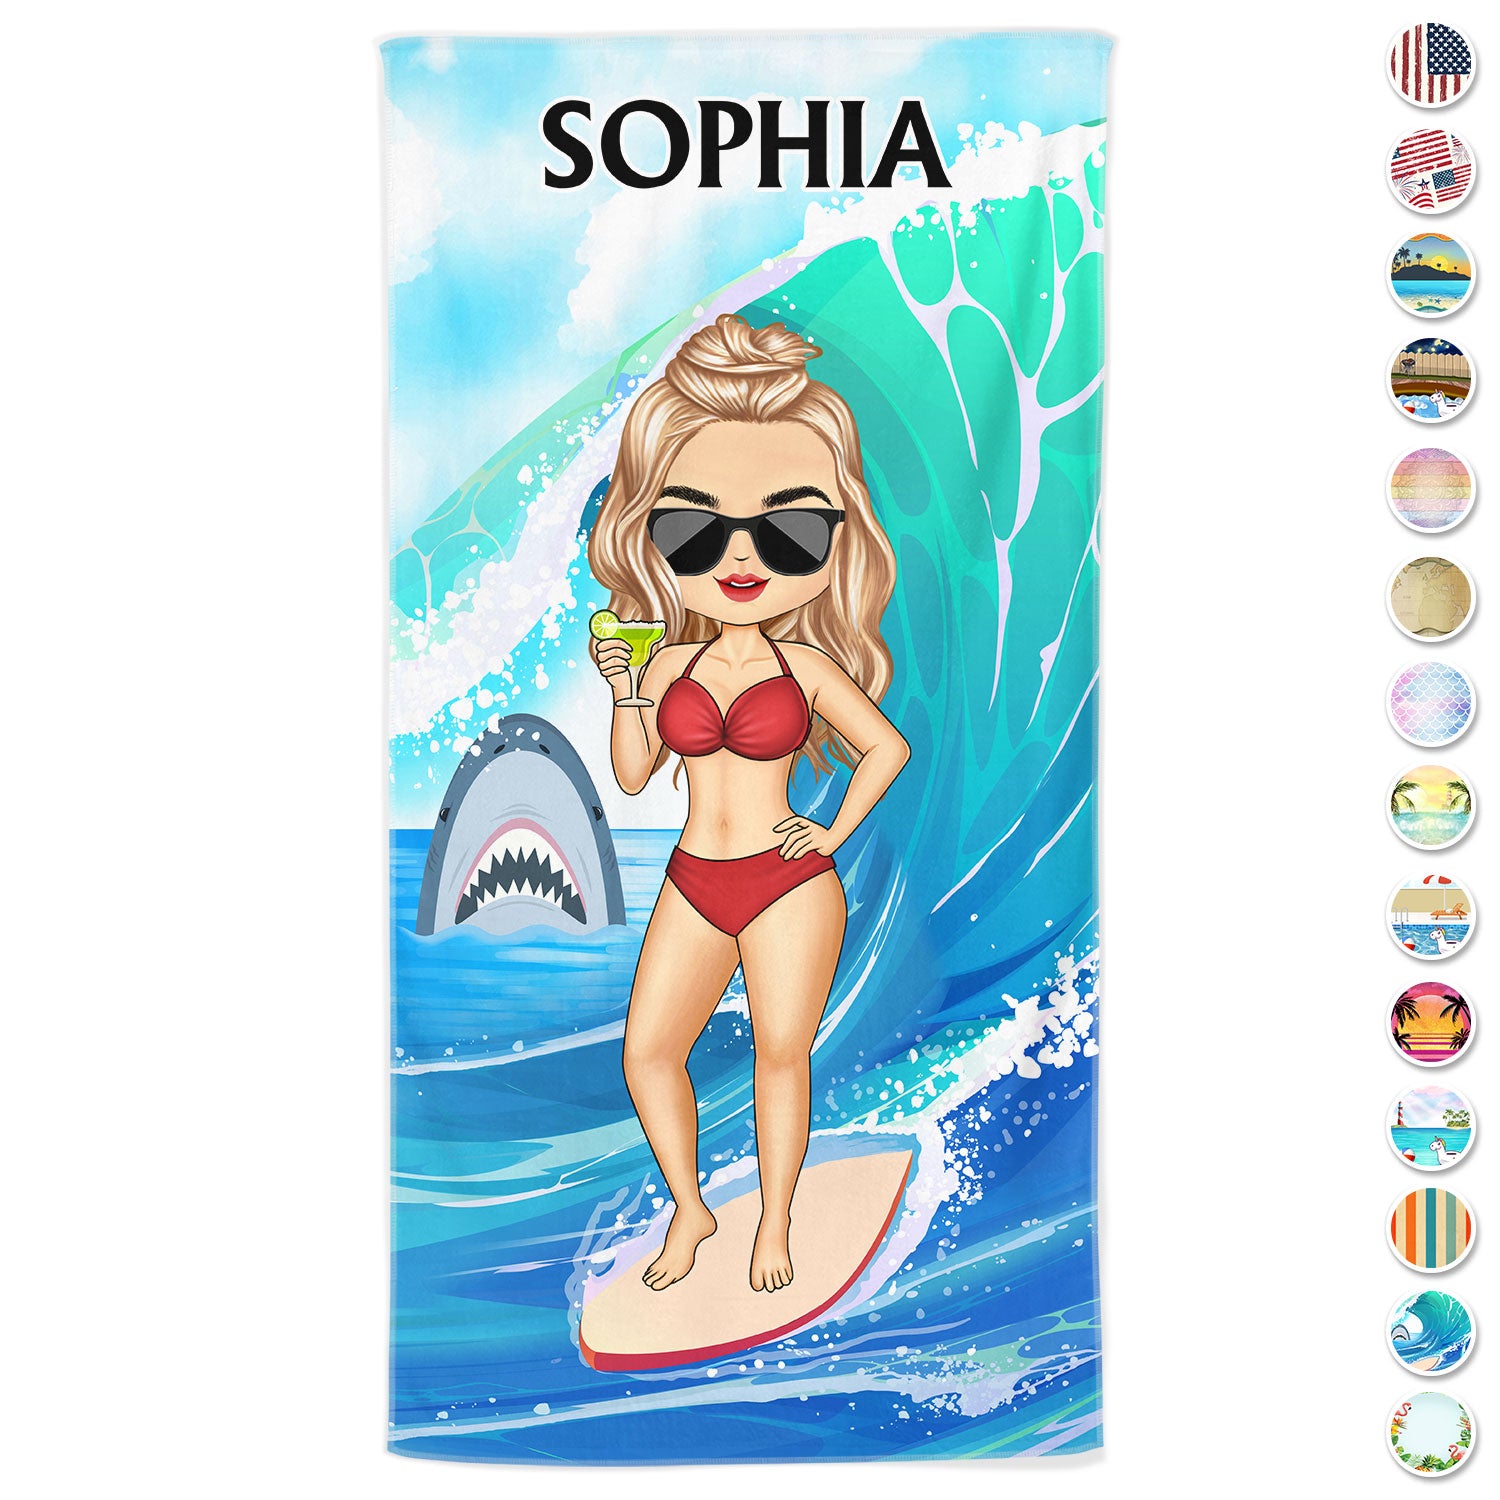 Chibi Traveling Beach Poolside Swimming Picnic Surfing Vacation - Birthday, Funny Gift For Her, Him, Besties, Family - Personalized Custom Beach Towel